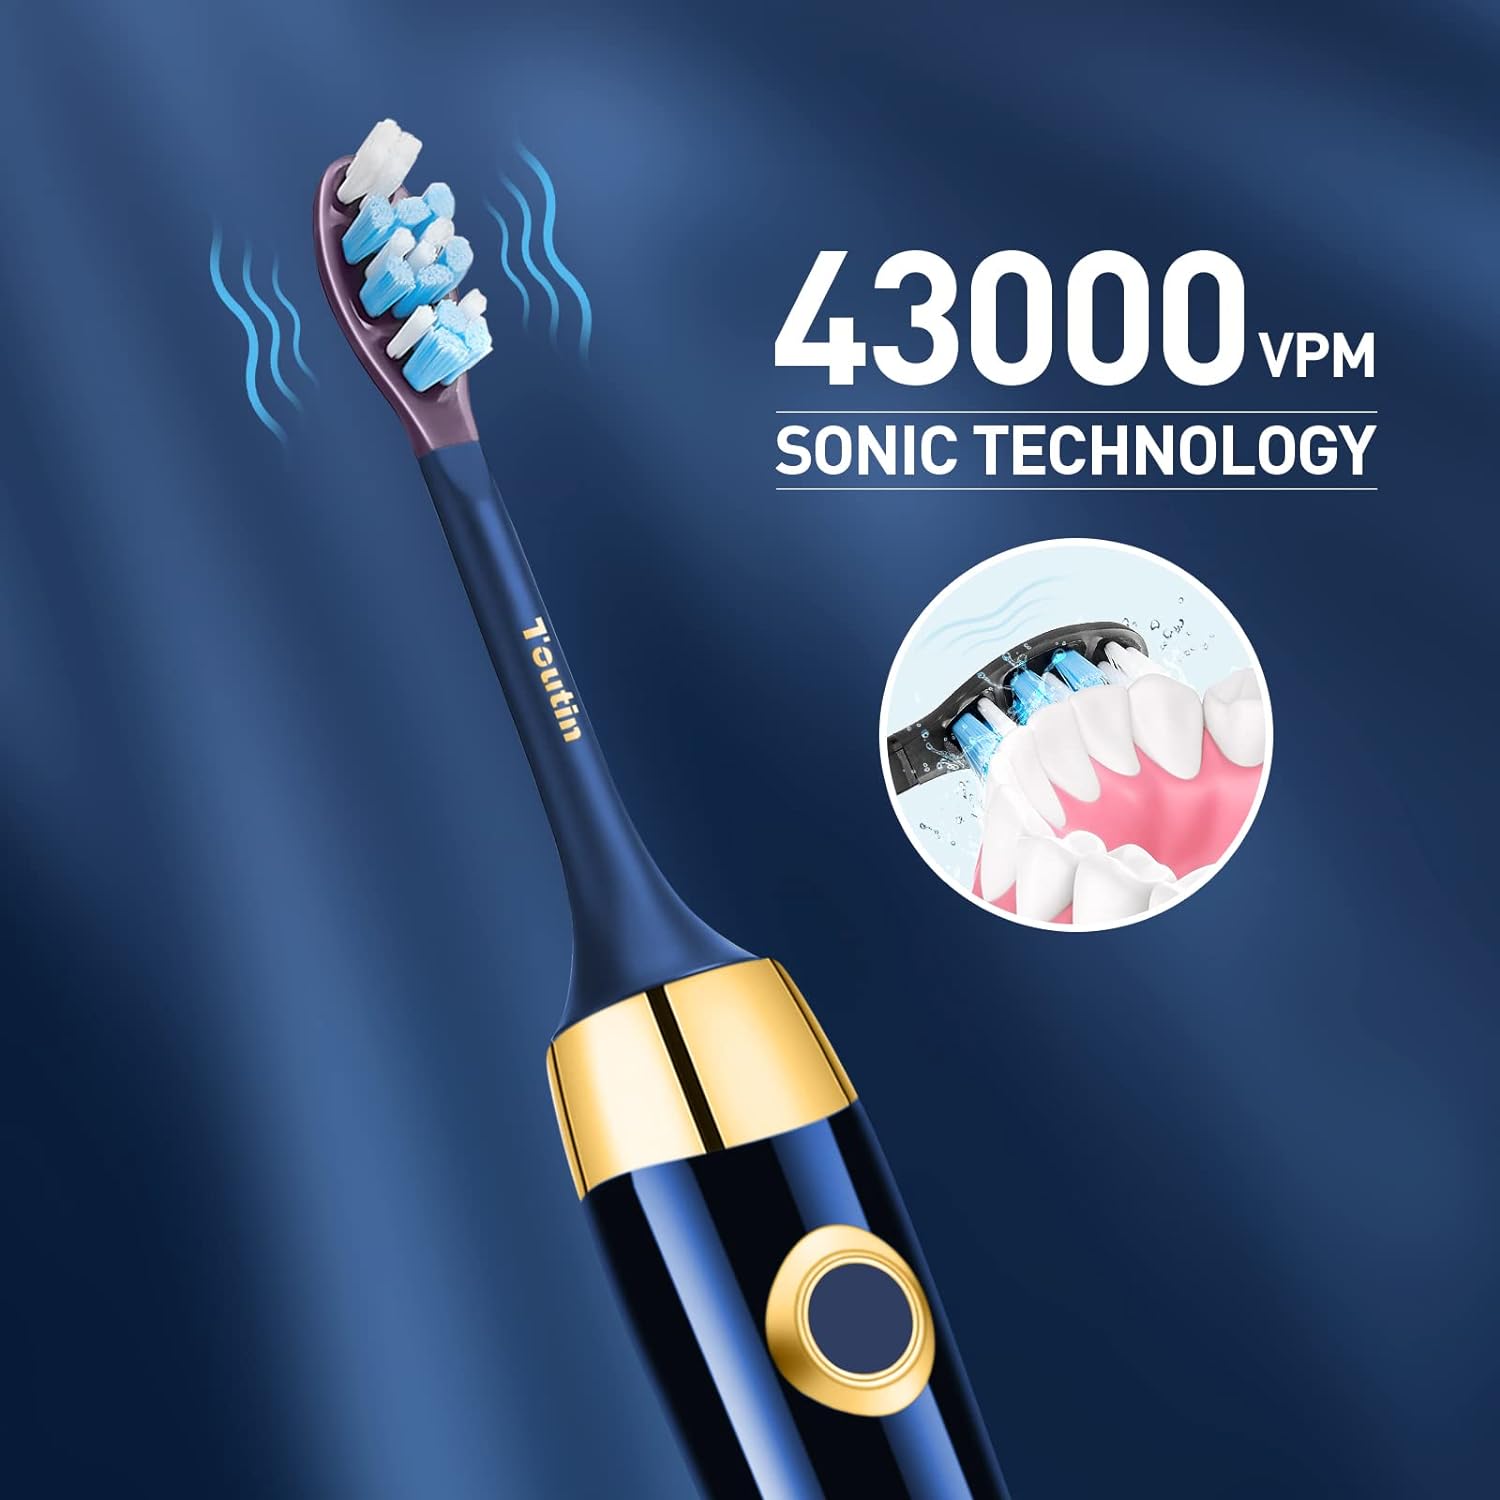 TouTin Electric Toothbrush, Sonic Electric Toothbrush for Adults with 12 Brush Heads, Electric Travel Toothbrush, LED Light Toothbrush,IPX7 Waterproof (Blue)